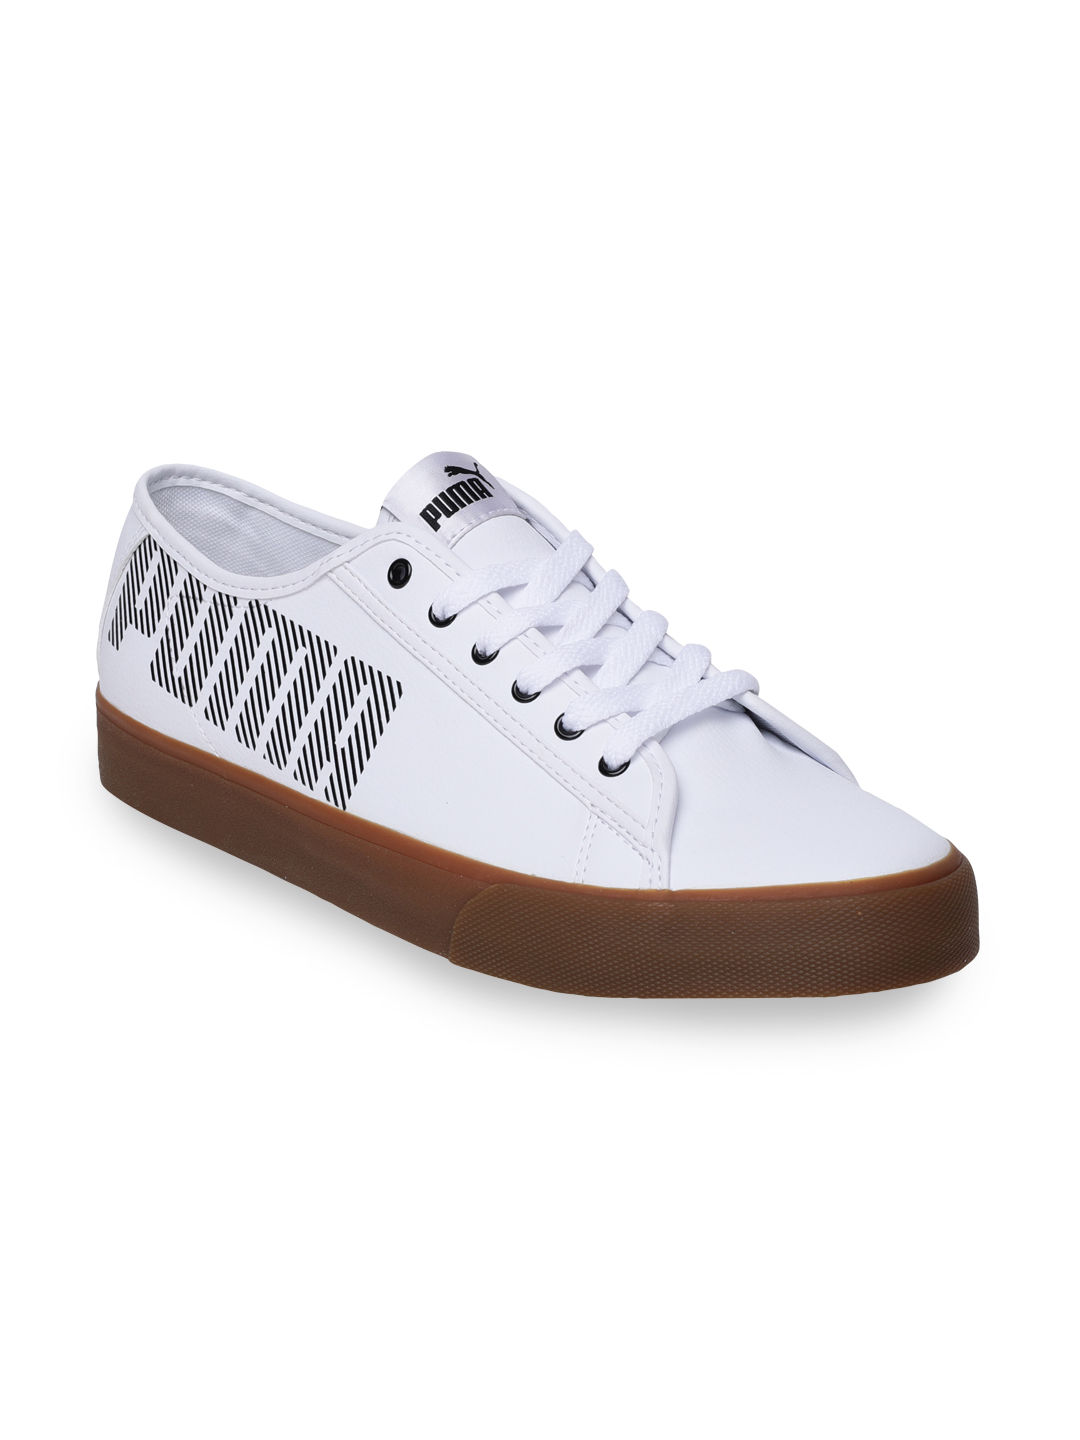 Original Classic - PUMA BARI SNEAKERS Shop now: http://bit.ly/2XElHw9  Retailing RM185.00, get it now @ RM129.50 ! (Size available: eu38 / eu40.5  / eu42) Exclusively for OC online store only. www.OC.com.my |